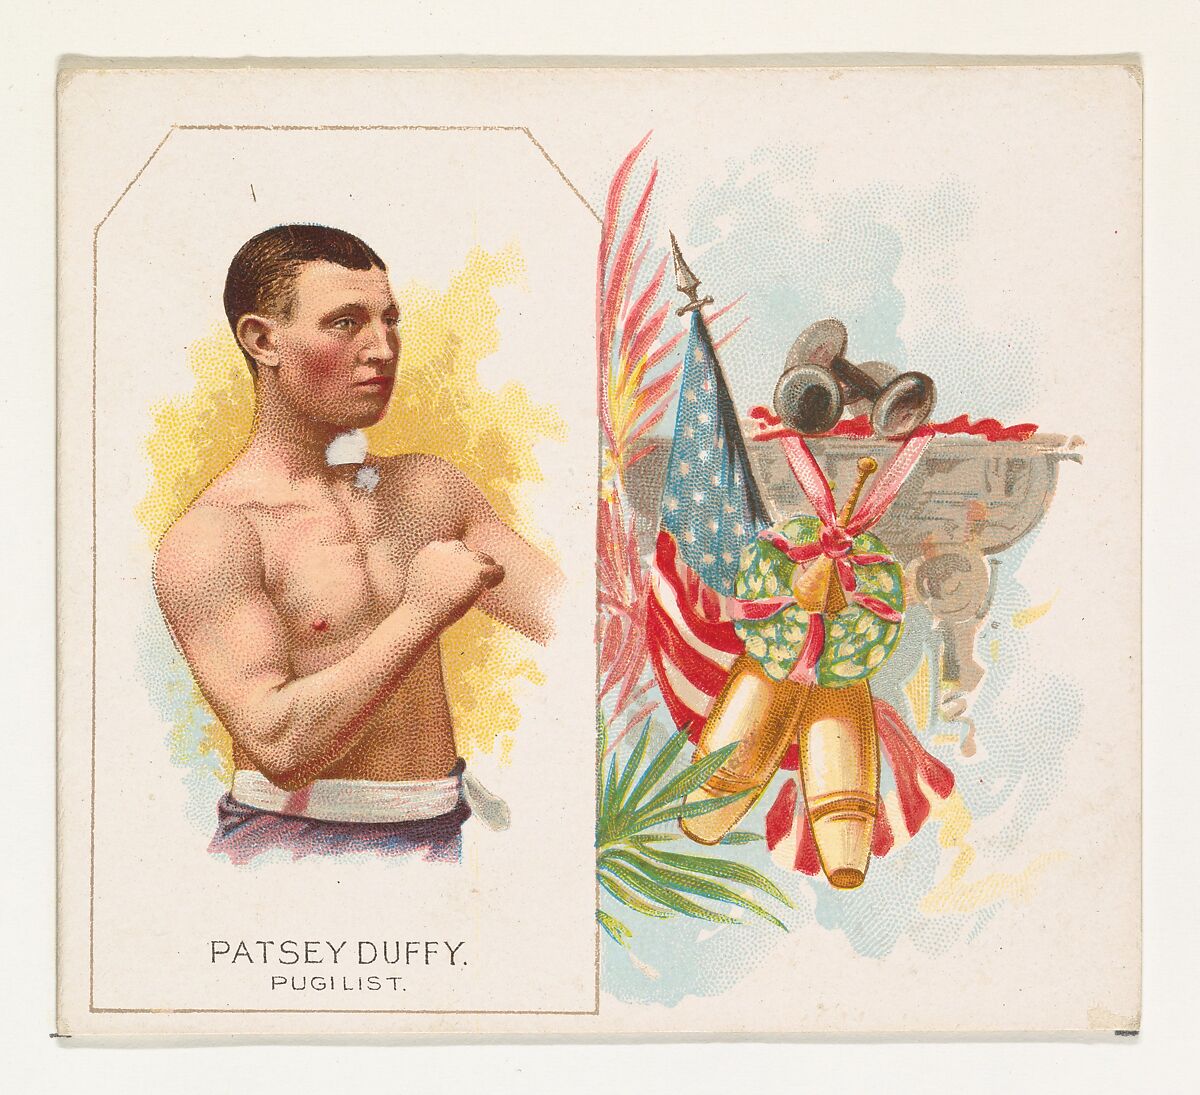 Patsey Duffy, Pugilist, from World's Champions, Second Series (N43) for Allen & Ginter Cigarettes, Allen &amp; Ginter (American, Richmond, Virginia), Commercial lithograph 